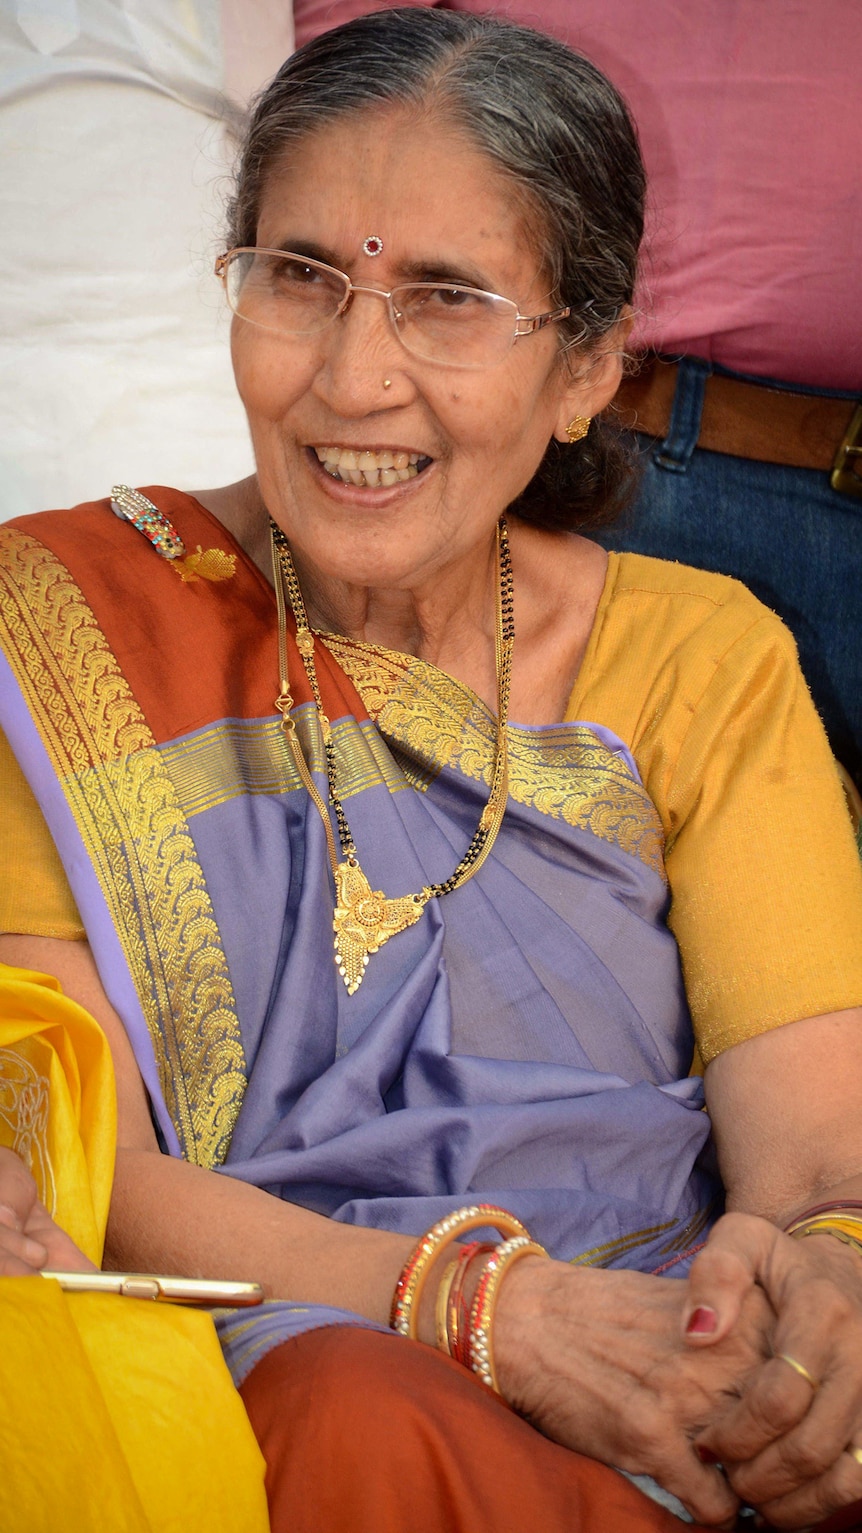 A close up of a woman wearing a bindi on her forhead and glasses as she smiles.